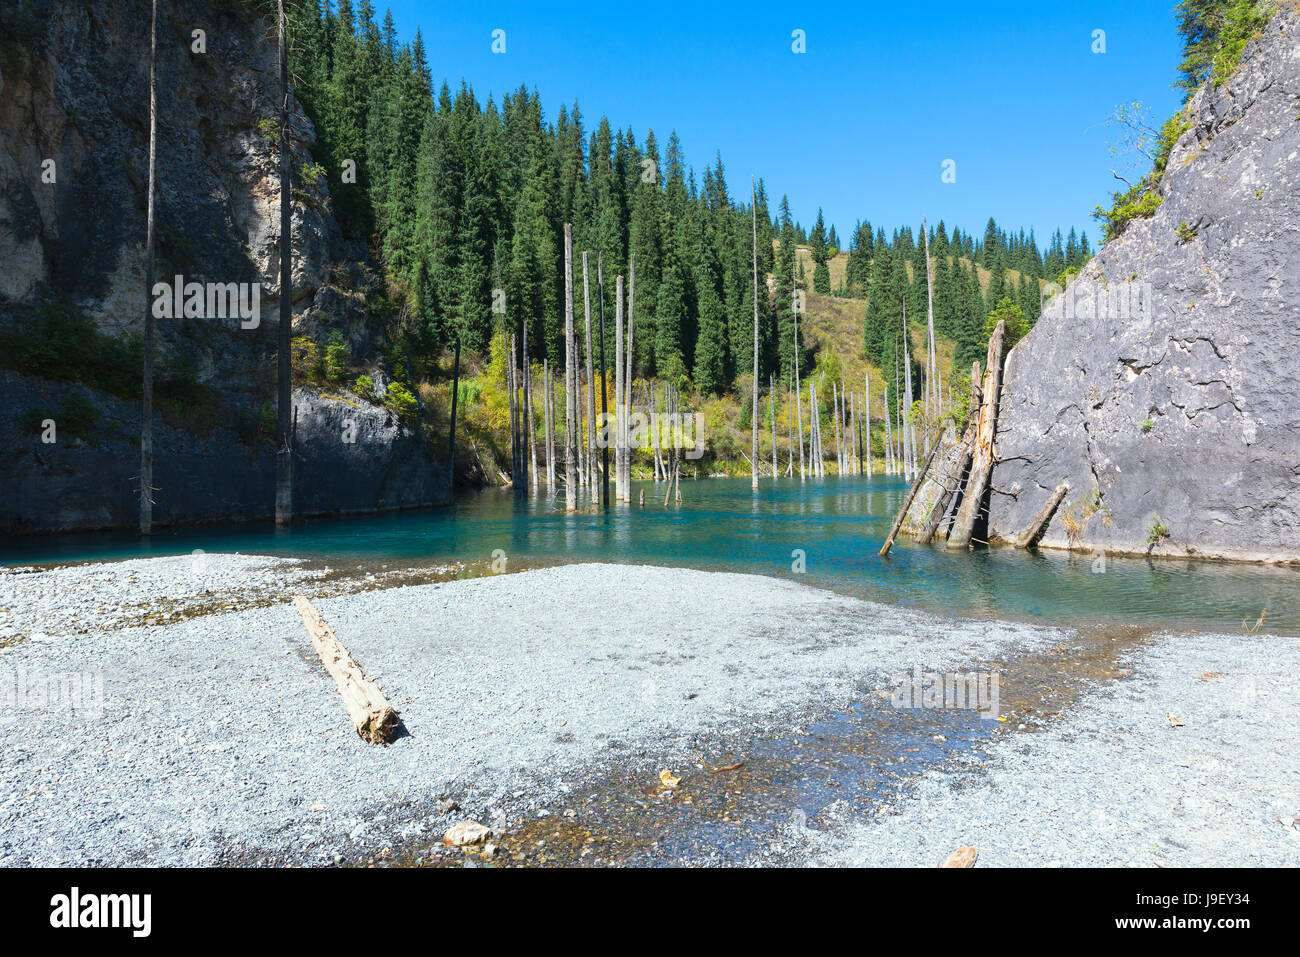 Dried trunks of Picea schrenkiana pointing out of  water in Kaindy lake also known as Birch Tree Lake or Submerged Forest, Tien Shan Mountains, Kazakh Stock Photo